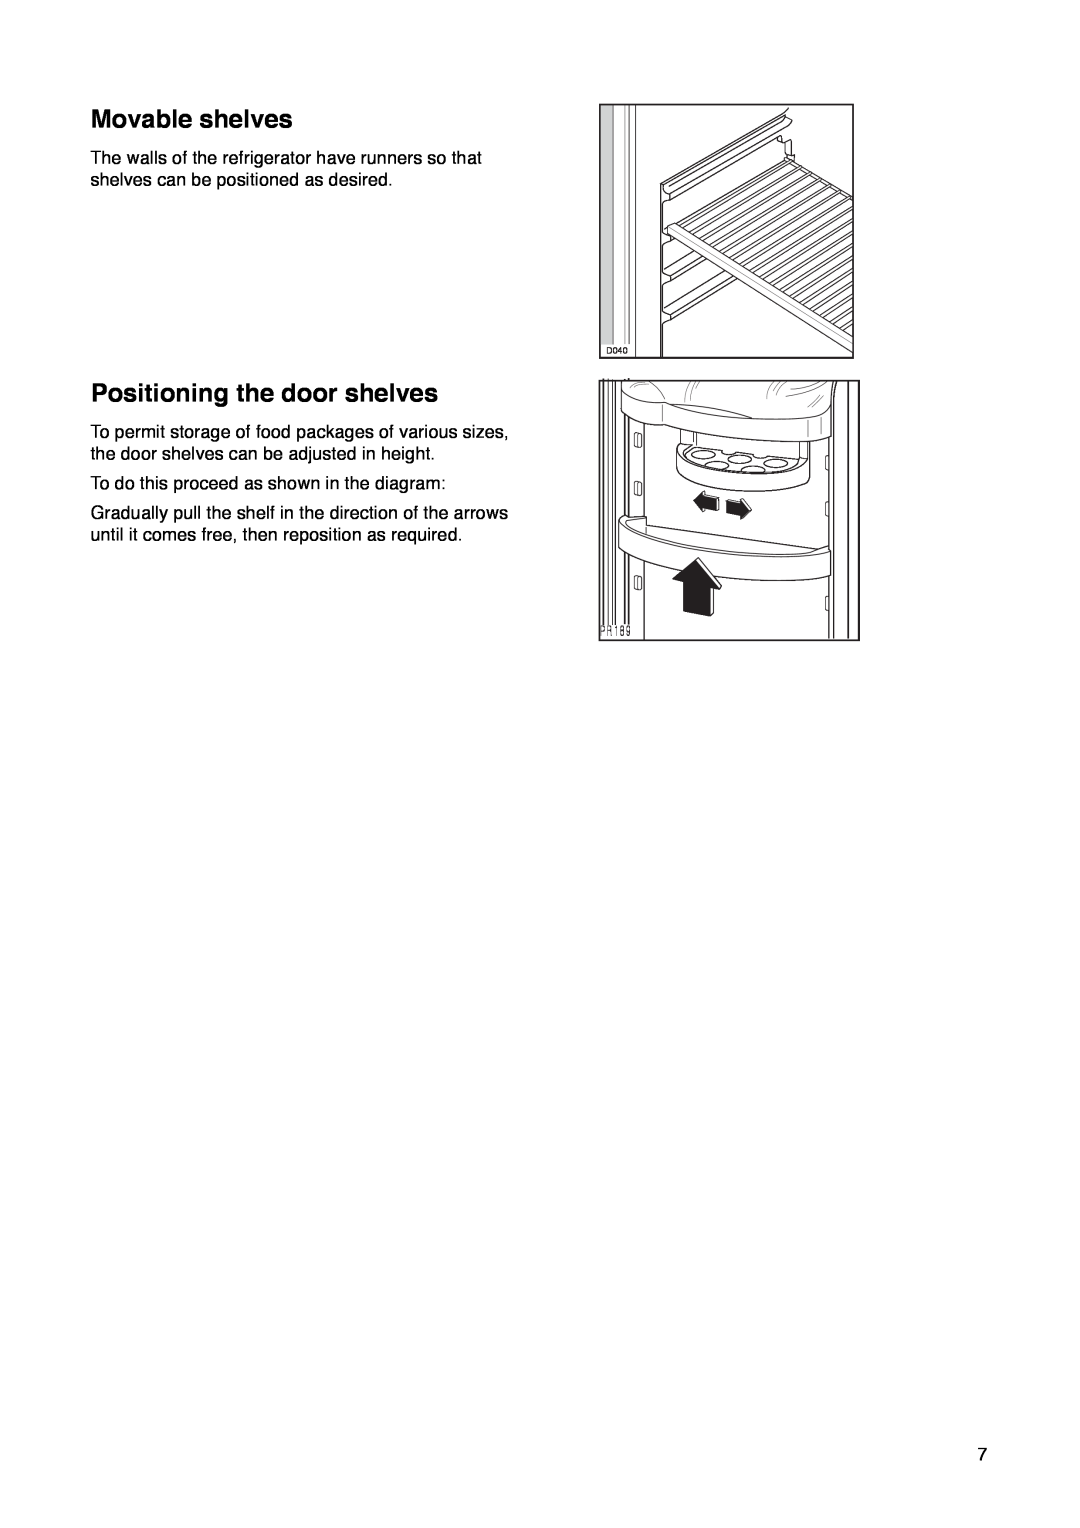 Tricity Bendix FD 852 installation instructions Movable shelves, Positioning the door shelves 